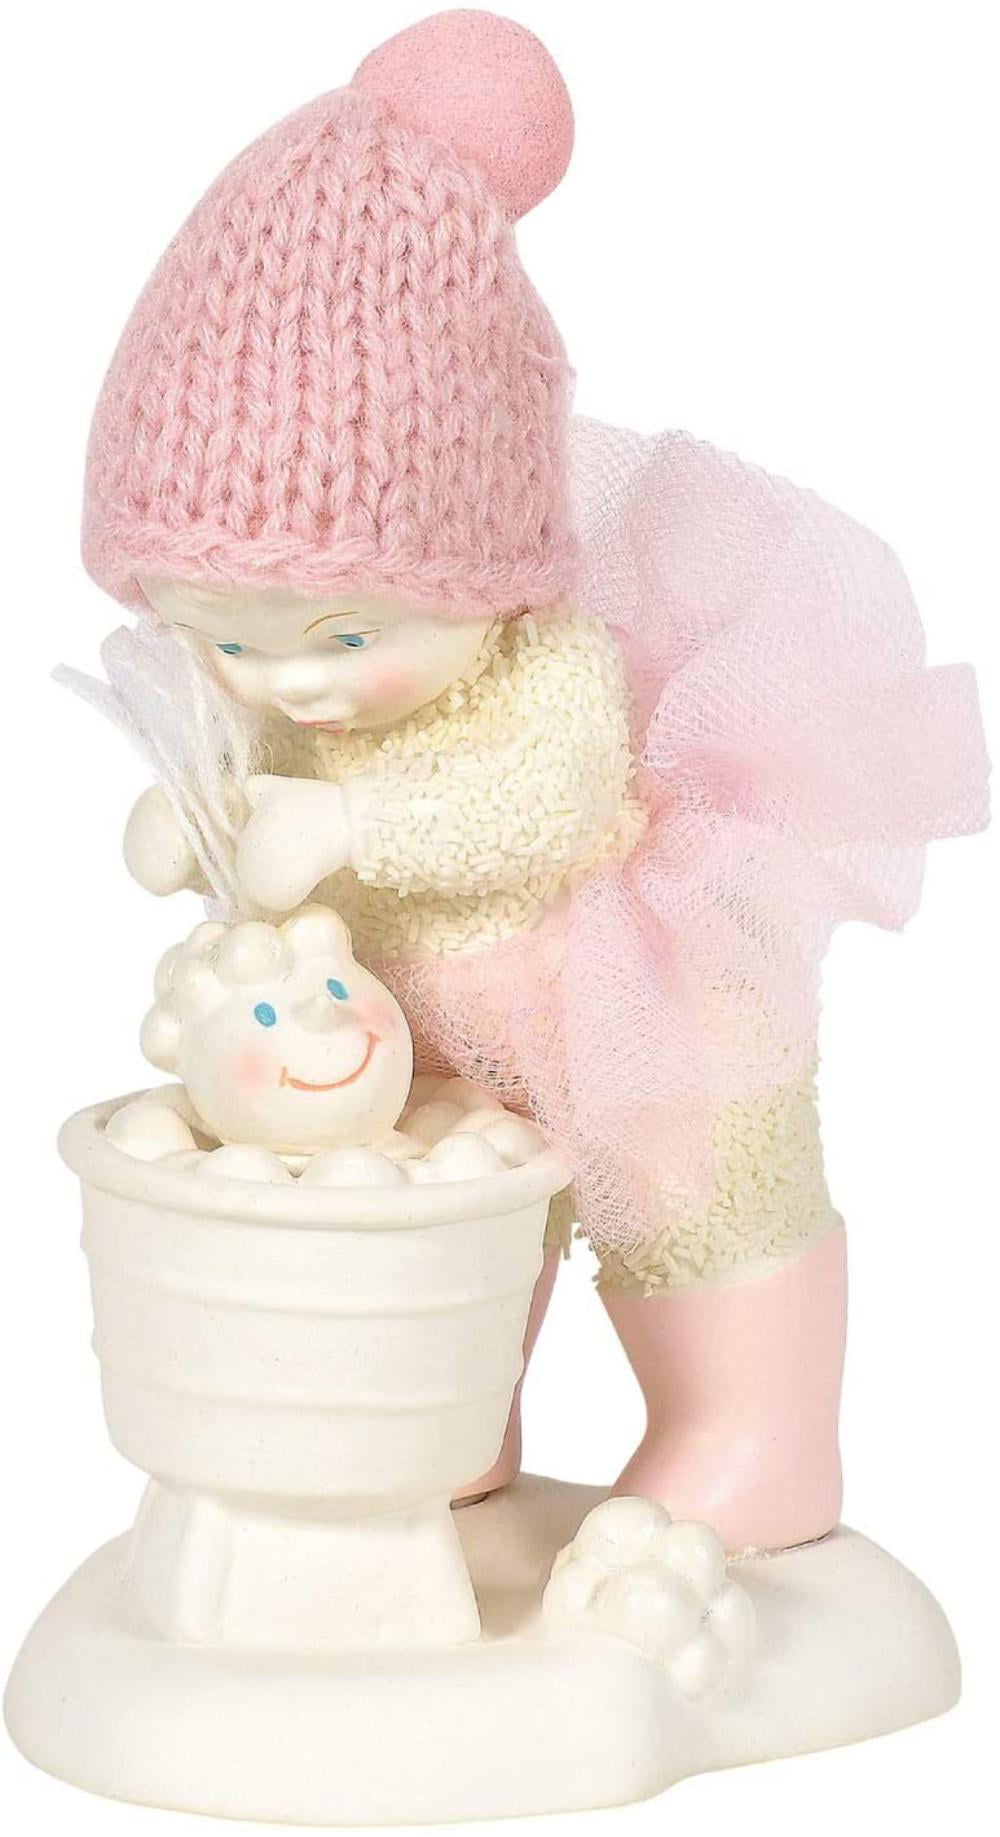 Snowbabies Department 56 Dream Collection Chilly Commute Figurine 6.5-Inch